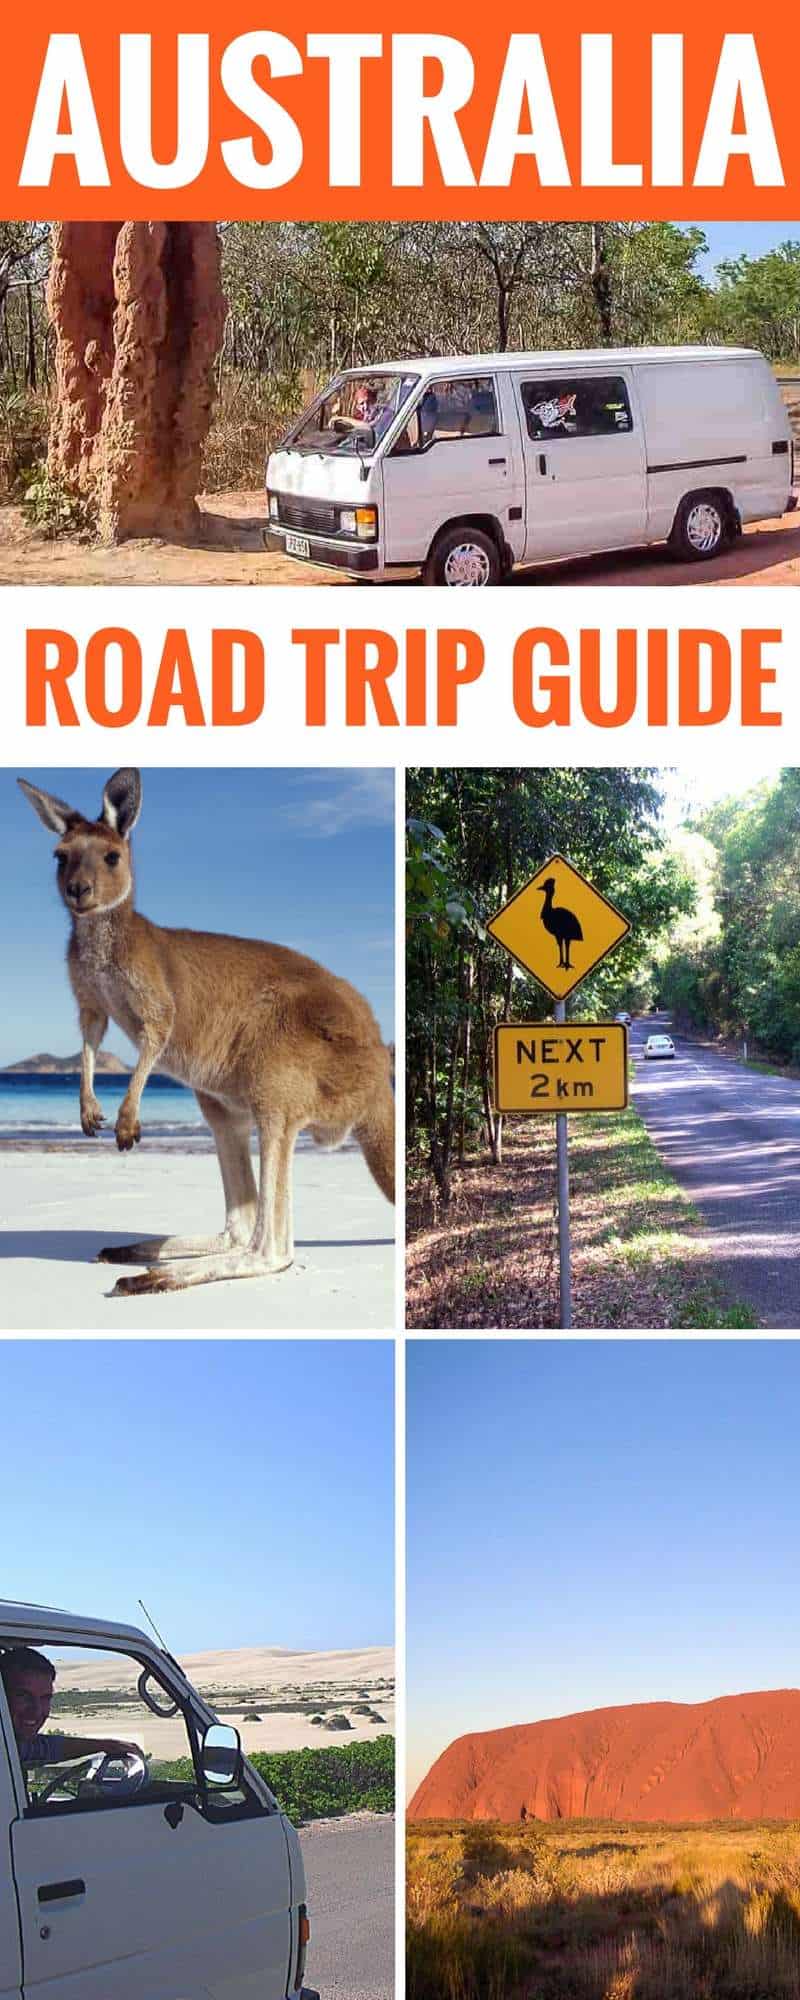 Australian Roadtrip Tips and Adventure. Planning to travel in Australia and have a fun Australian road trip? Here are our helpful tips and tricks for driving around in Australia that are worth adding to your itinerary. Australia Road Trip | Tips | Travel | Australia travel | roadtrip | budget #australia #travel #traveltips #roadtrip #wanderlust #adventure #vanlife